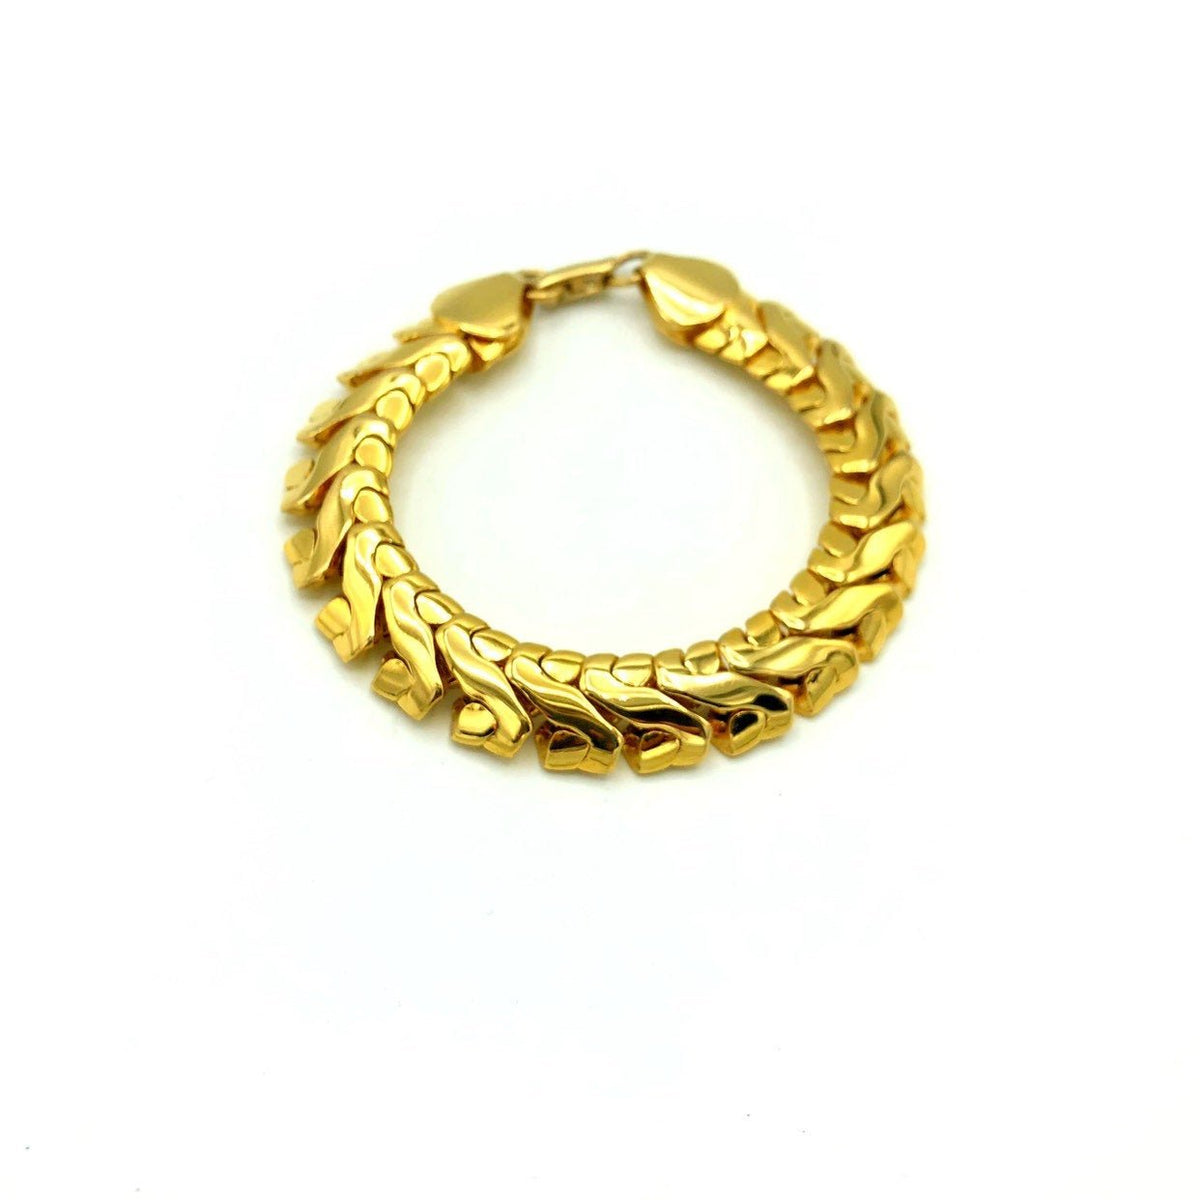 Napier Thick Gold Chain Vintage Stacking Bracelet - 24 Wishes Vintage Jewelry